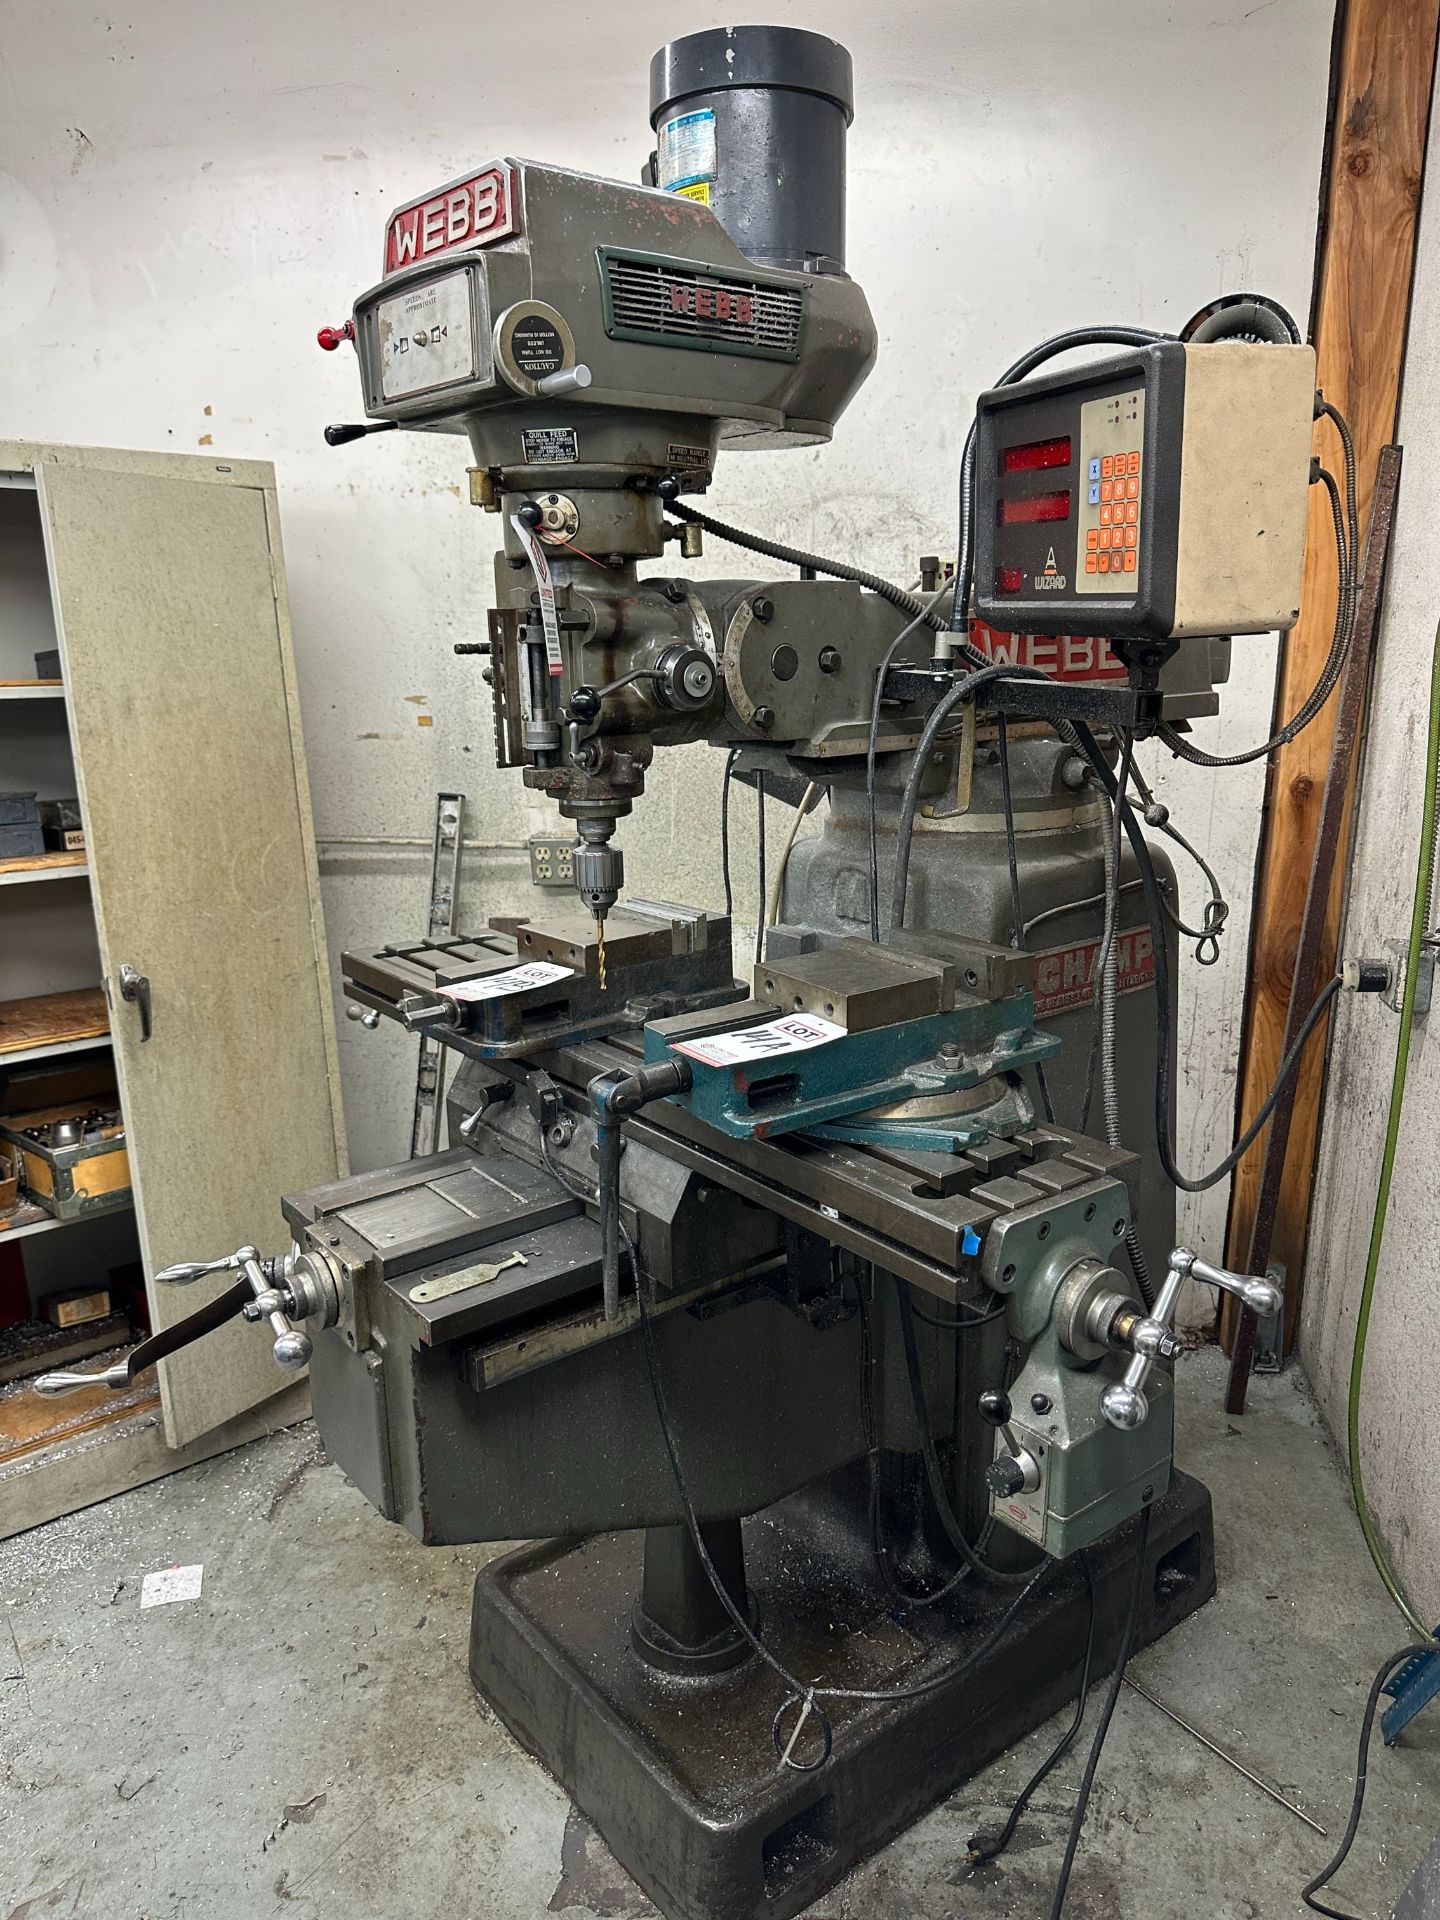 1987 WEBB CHAMP 4/H VERTICAL MILL, ANILAM WIZARD XY DRO, 10" X 50" TABLE, MFG NO. 4614, NOTE: (2) - Image 6 of 7